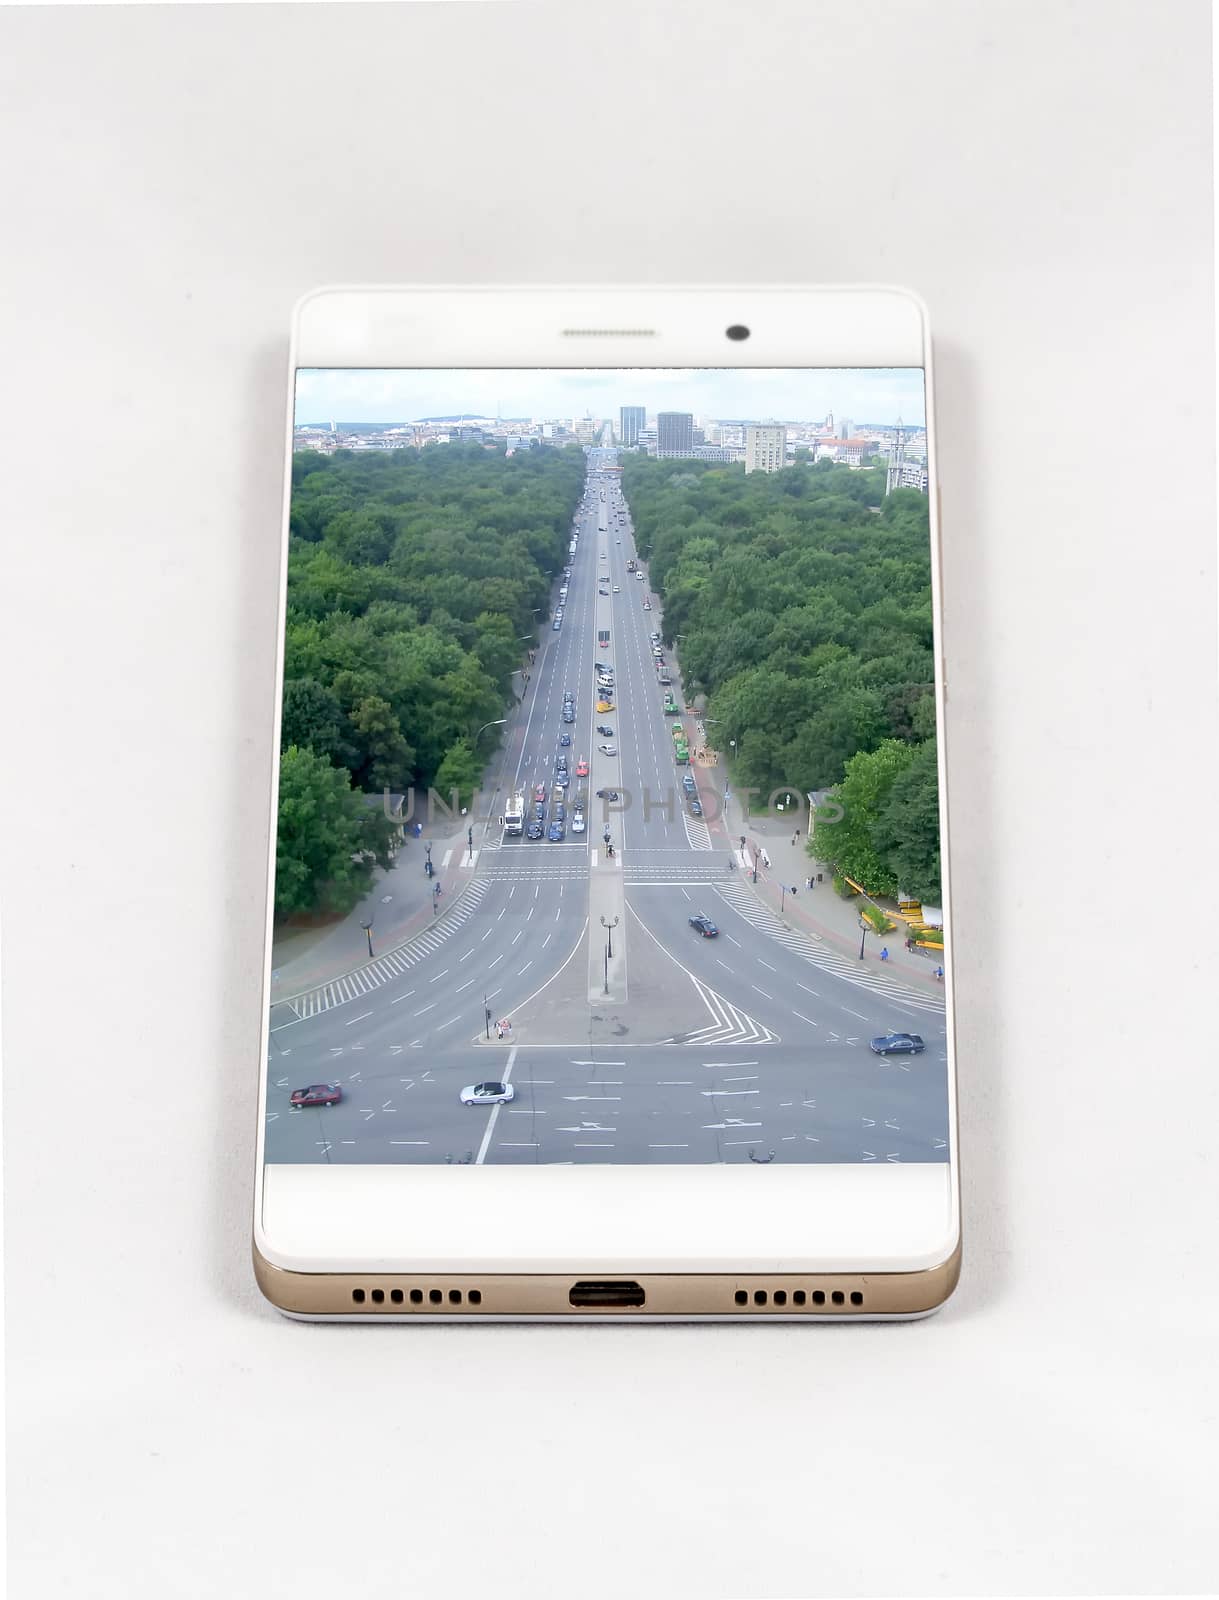 Modern smartphone with full screen picture of Berlin, Germany. Concept for travel smartphone photography. All images in this composition are made by me and separately available on my portfolio